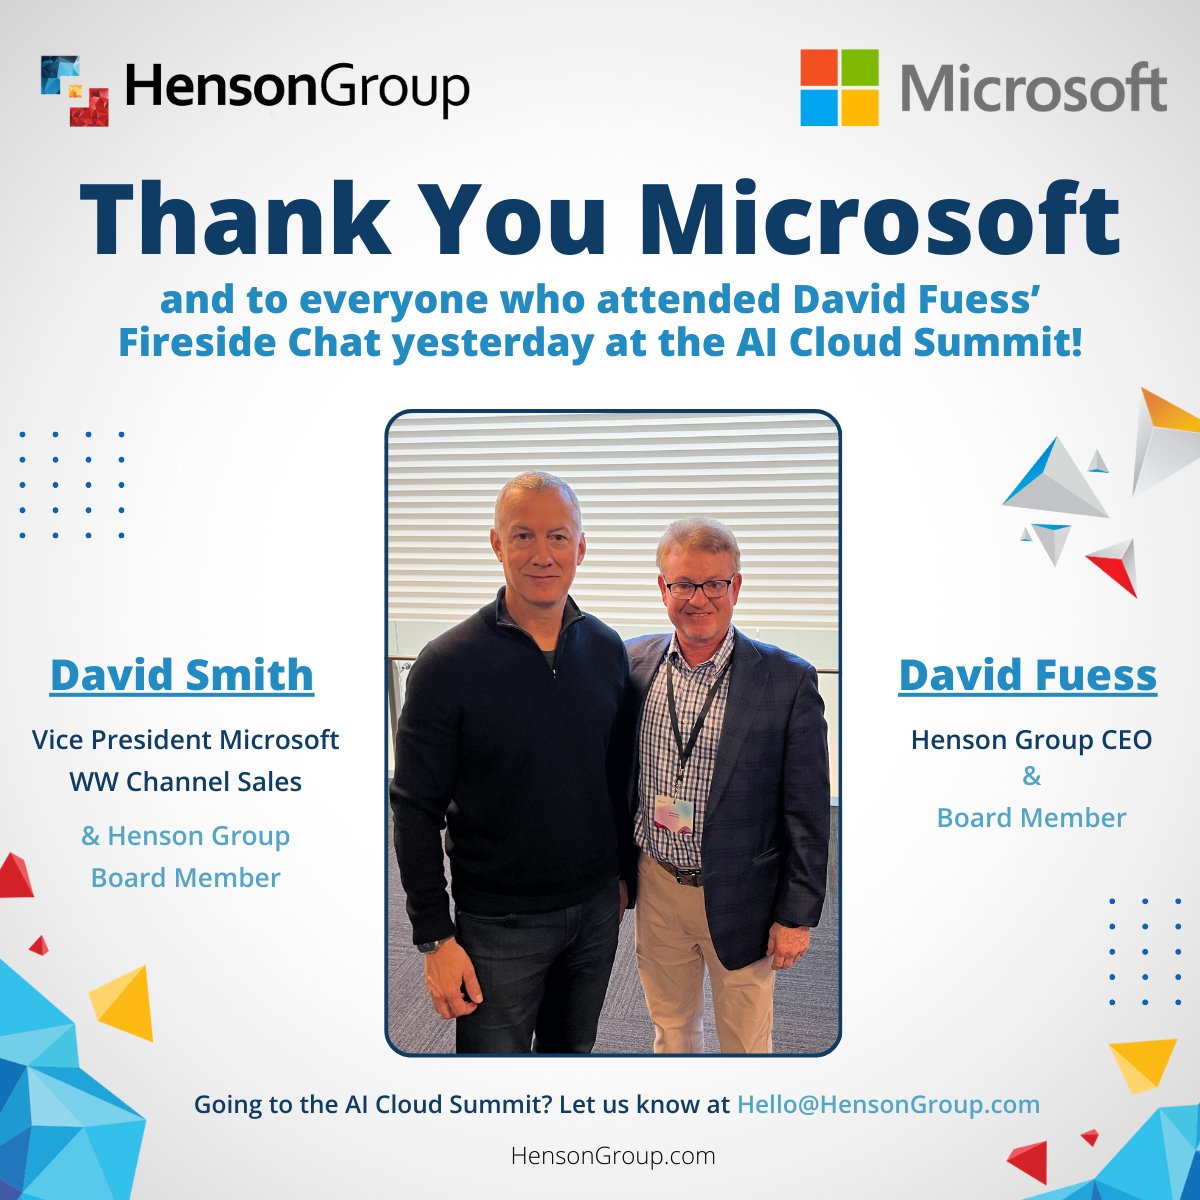 🔥 A heartfelt thank you to everyone who joined us at David Fuess' Fireside Chat during the Microsoft AI Cloud Summit yesterday! 

Stay tuned for what's coming next, because together, we're just getting started.

#HensonGroup